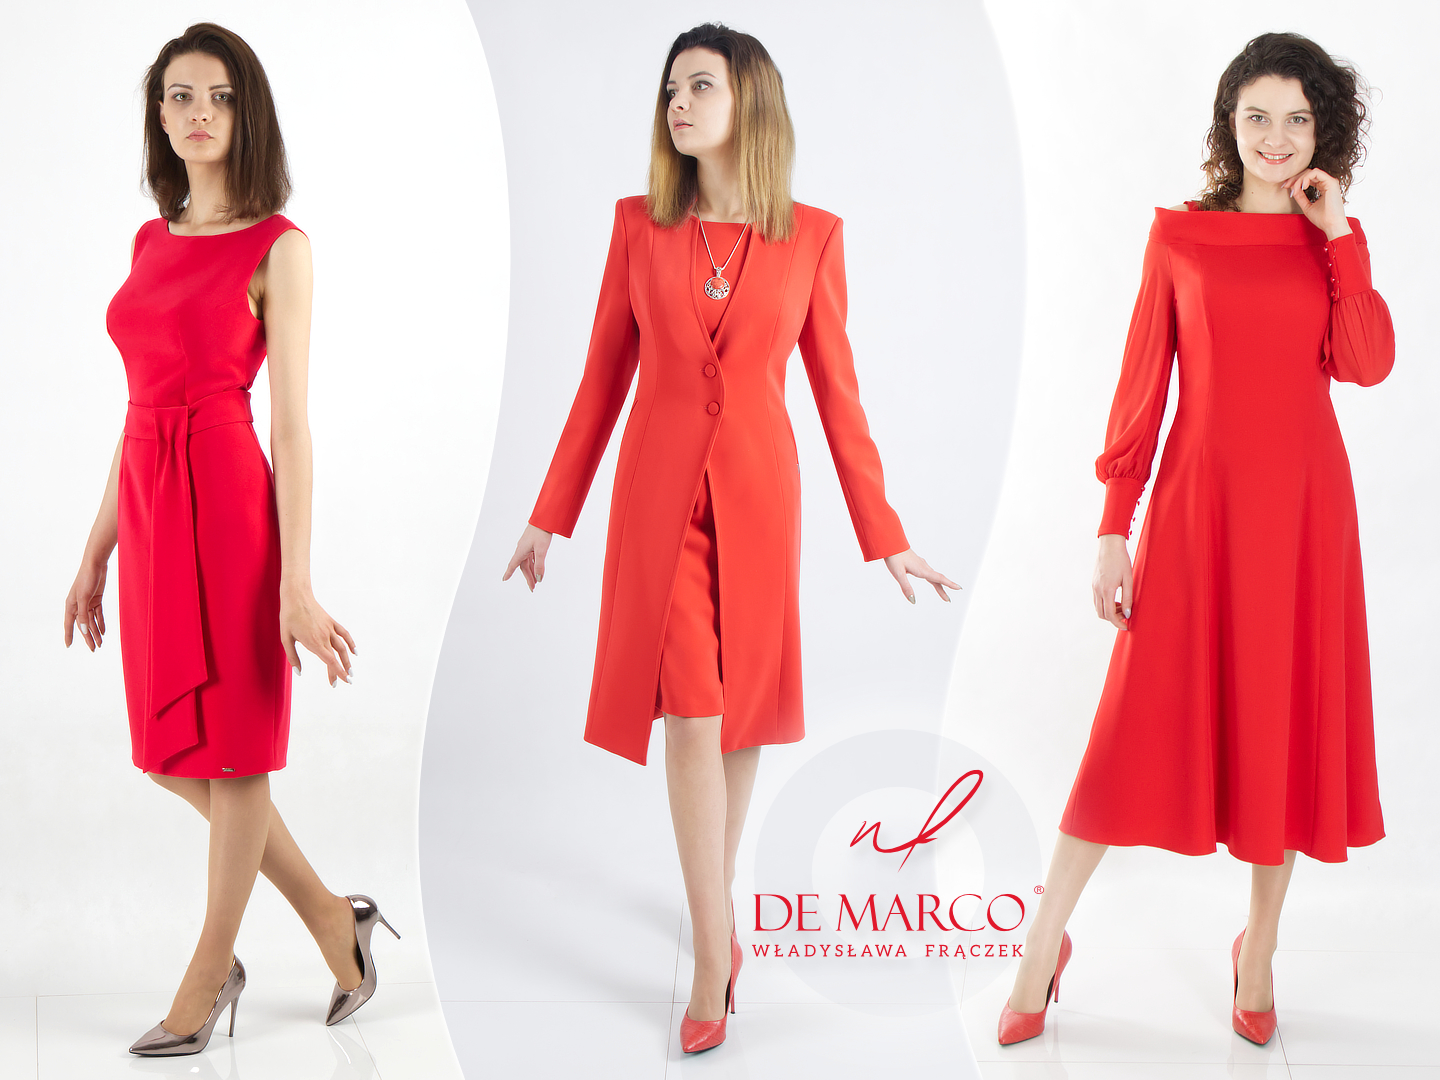 De Marco’s elegant red styles. Who do they suit, with whom do you pair them?